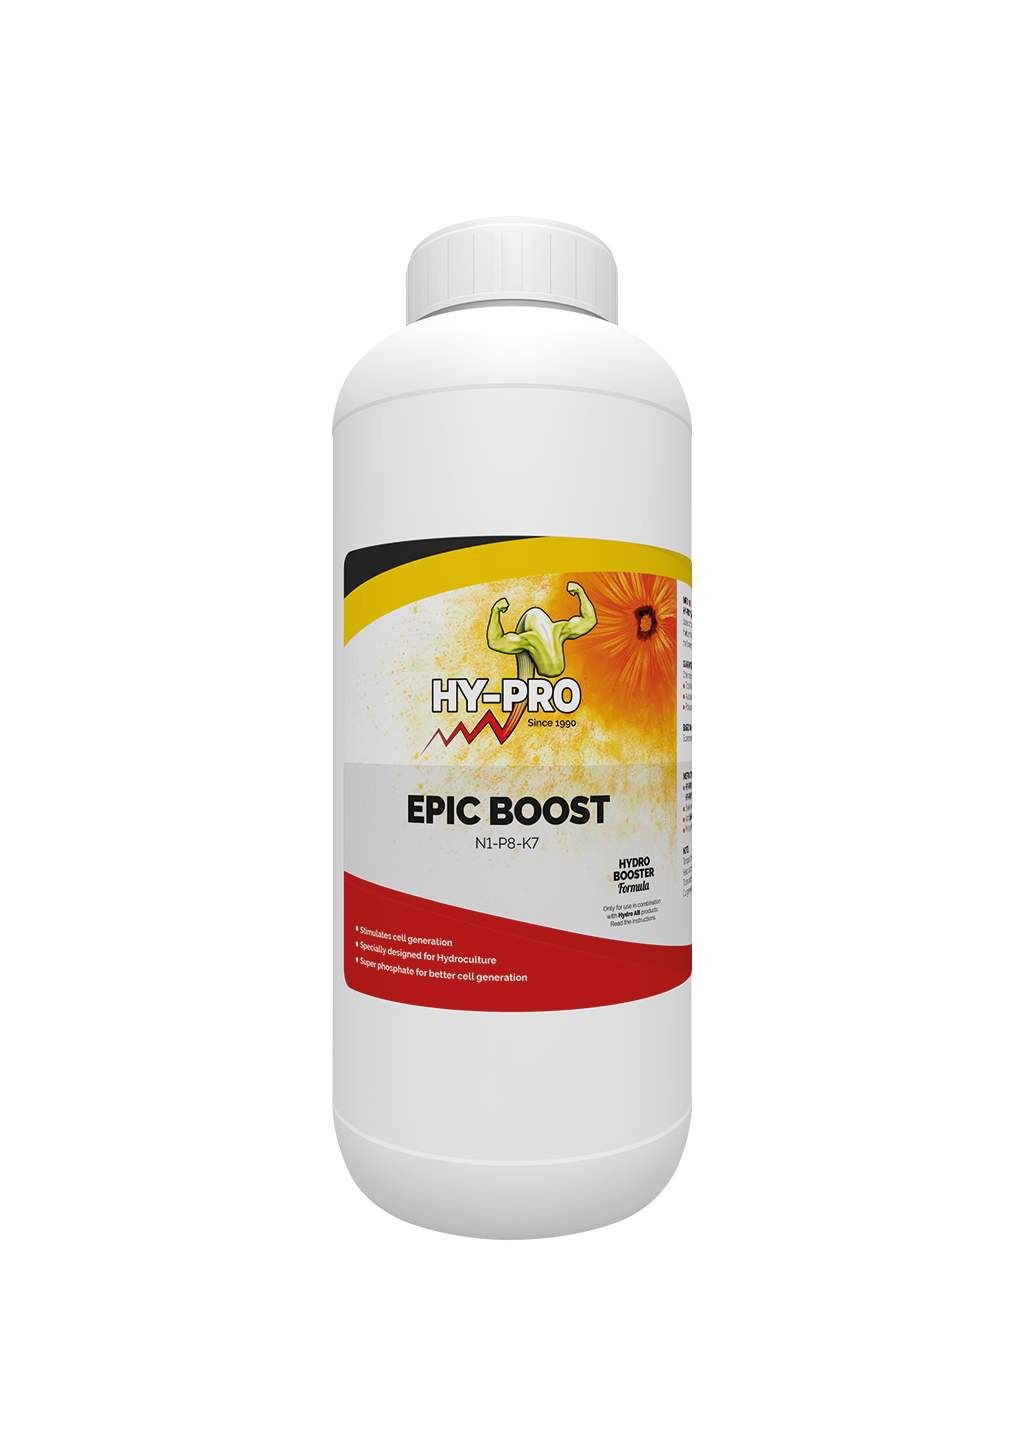 Hy-pro Hydro Epic Boost - 1 liter